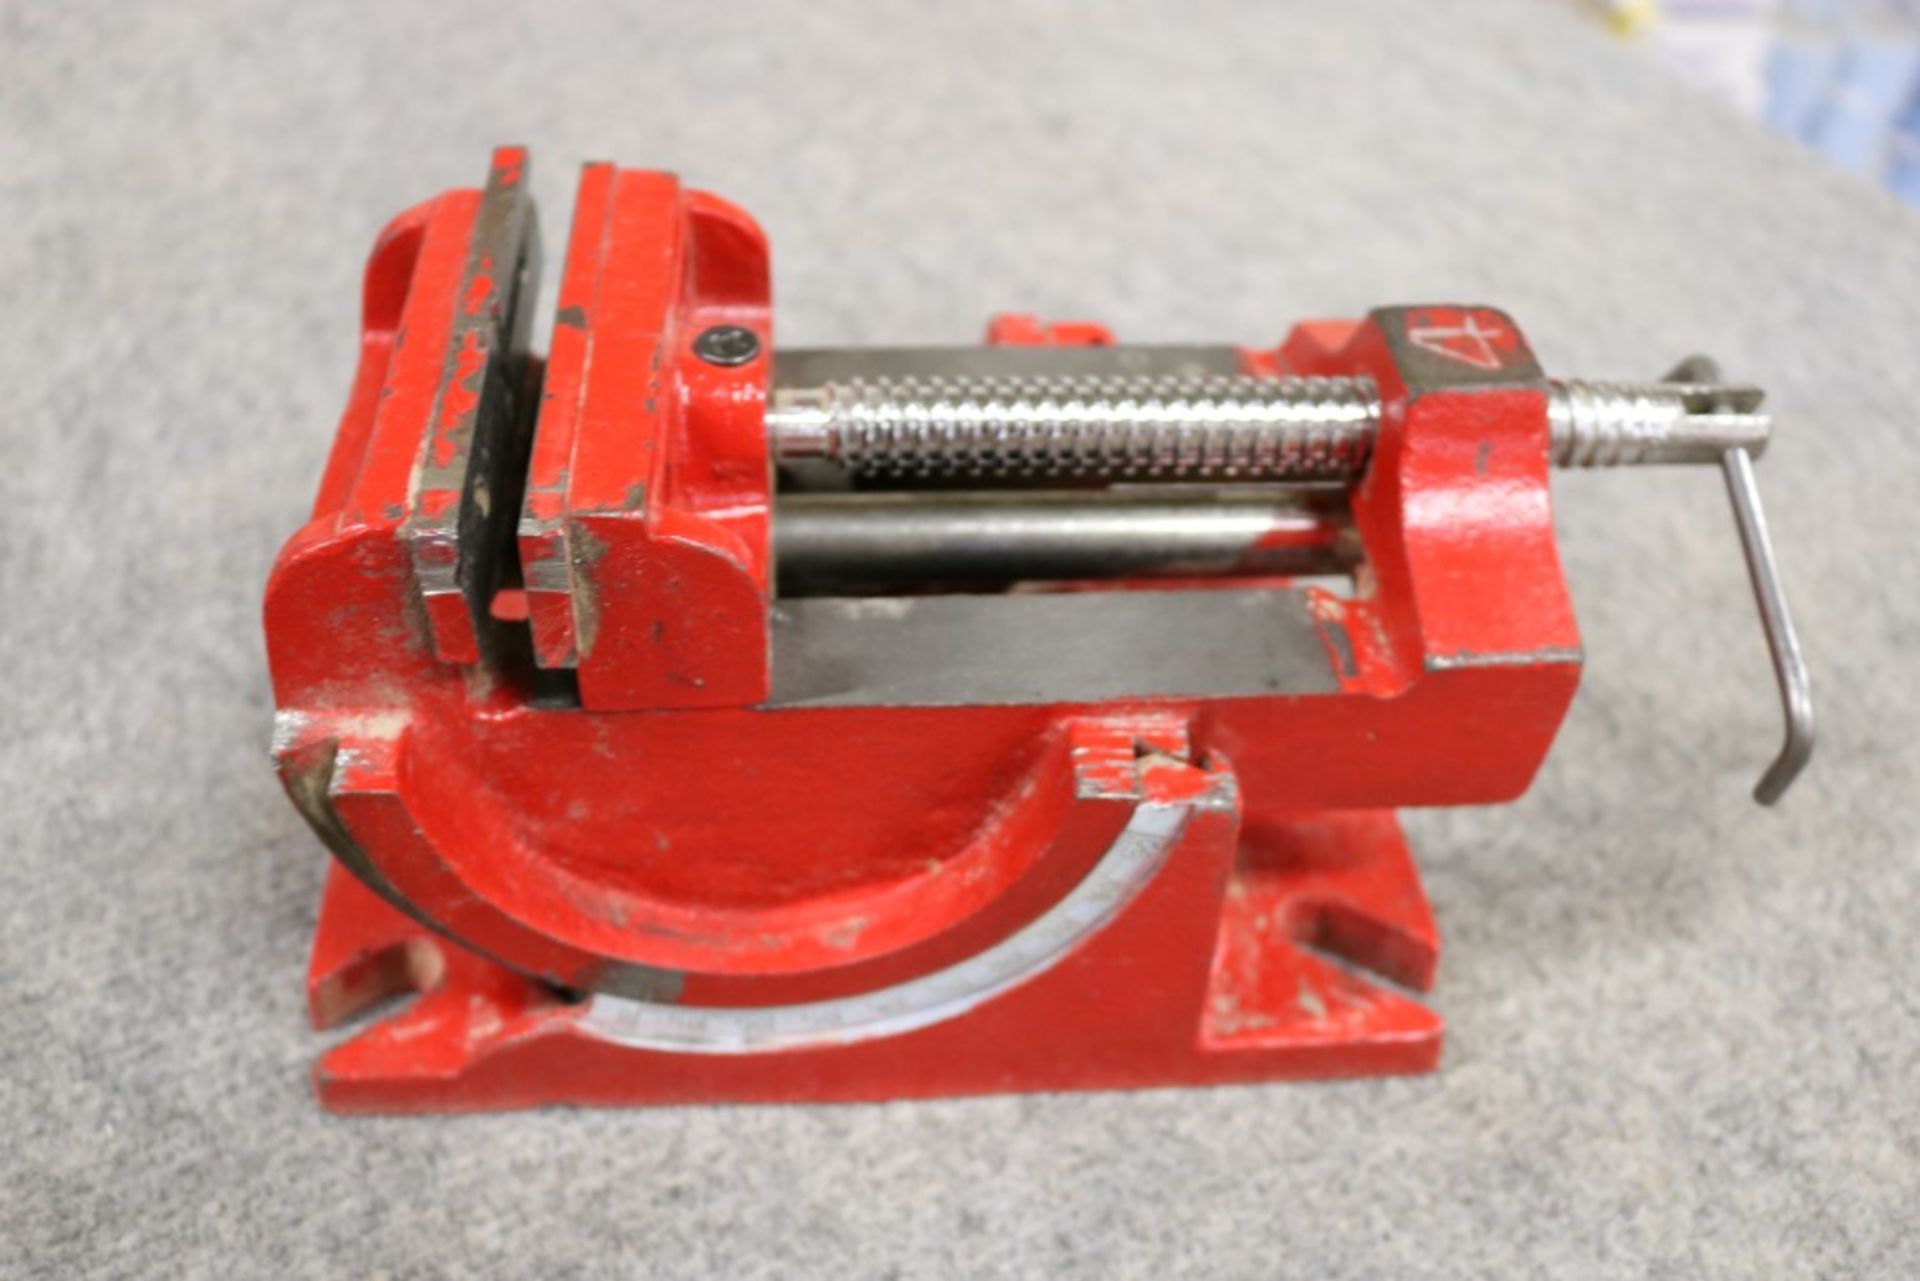 Wilton 10" Heavy Duty Vise and 4" Table Top 90 Degree Swivel Vise - Image 4 of 7